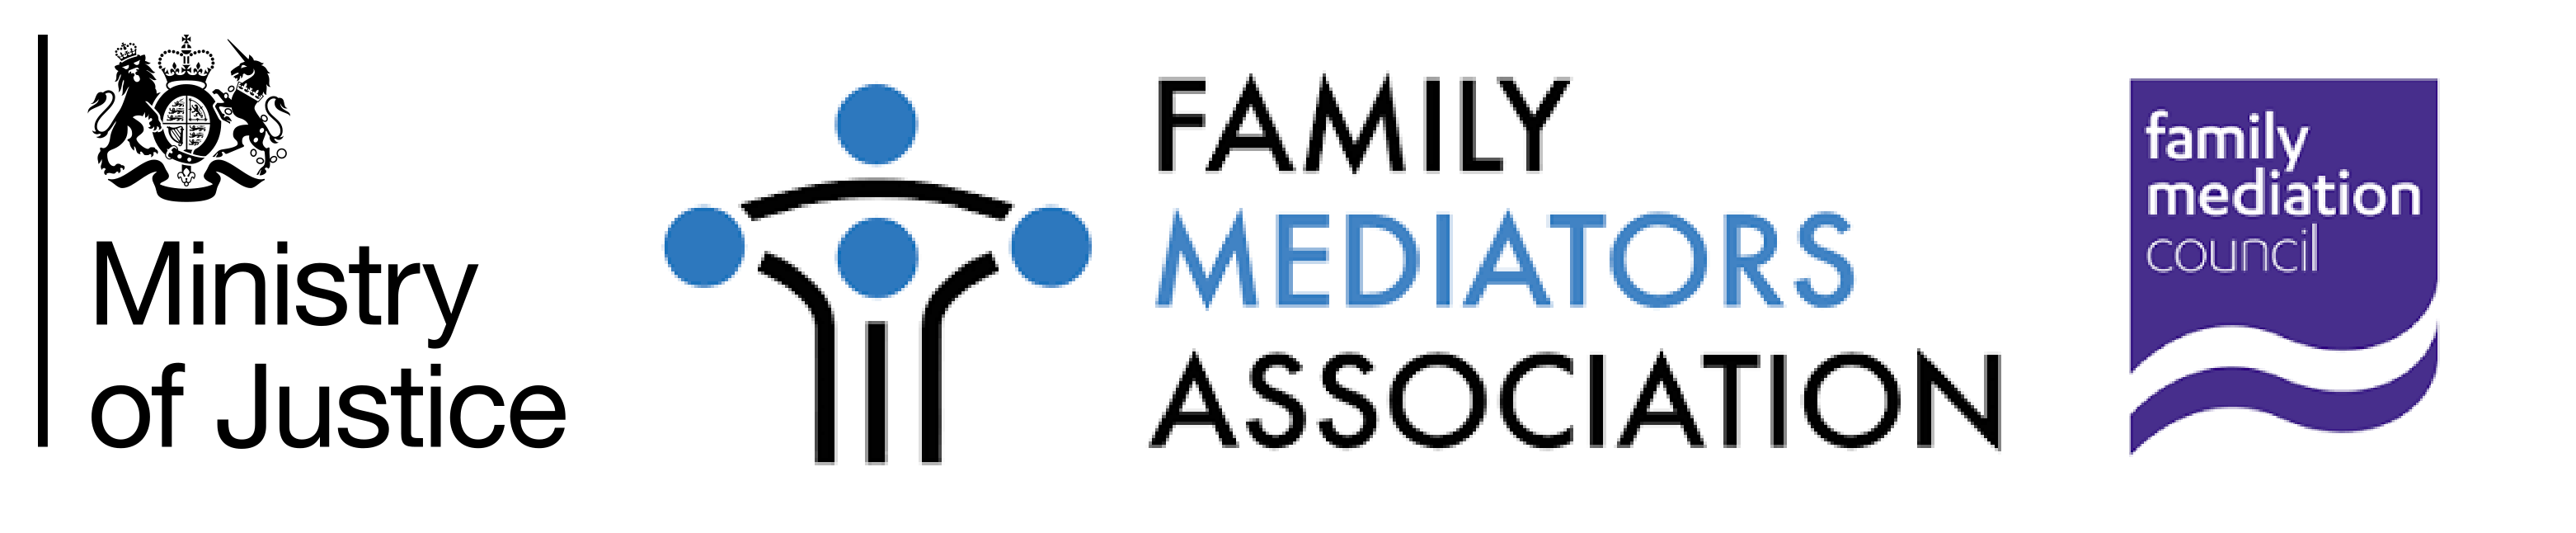 Alliance Family Mediation with Julia Love: Membership & Accreditation Banner